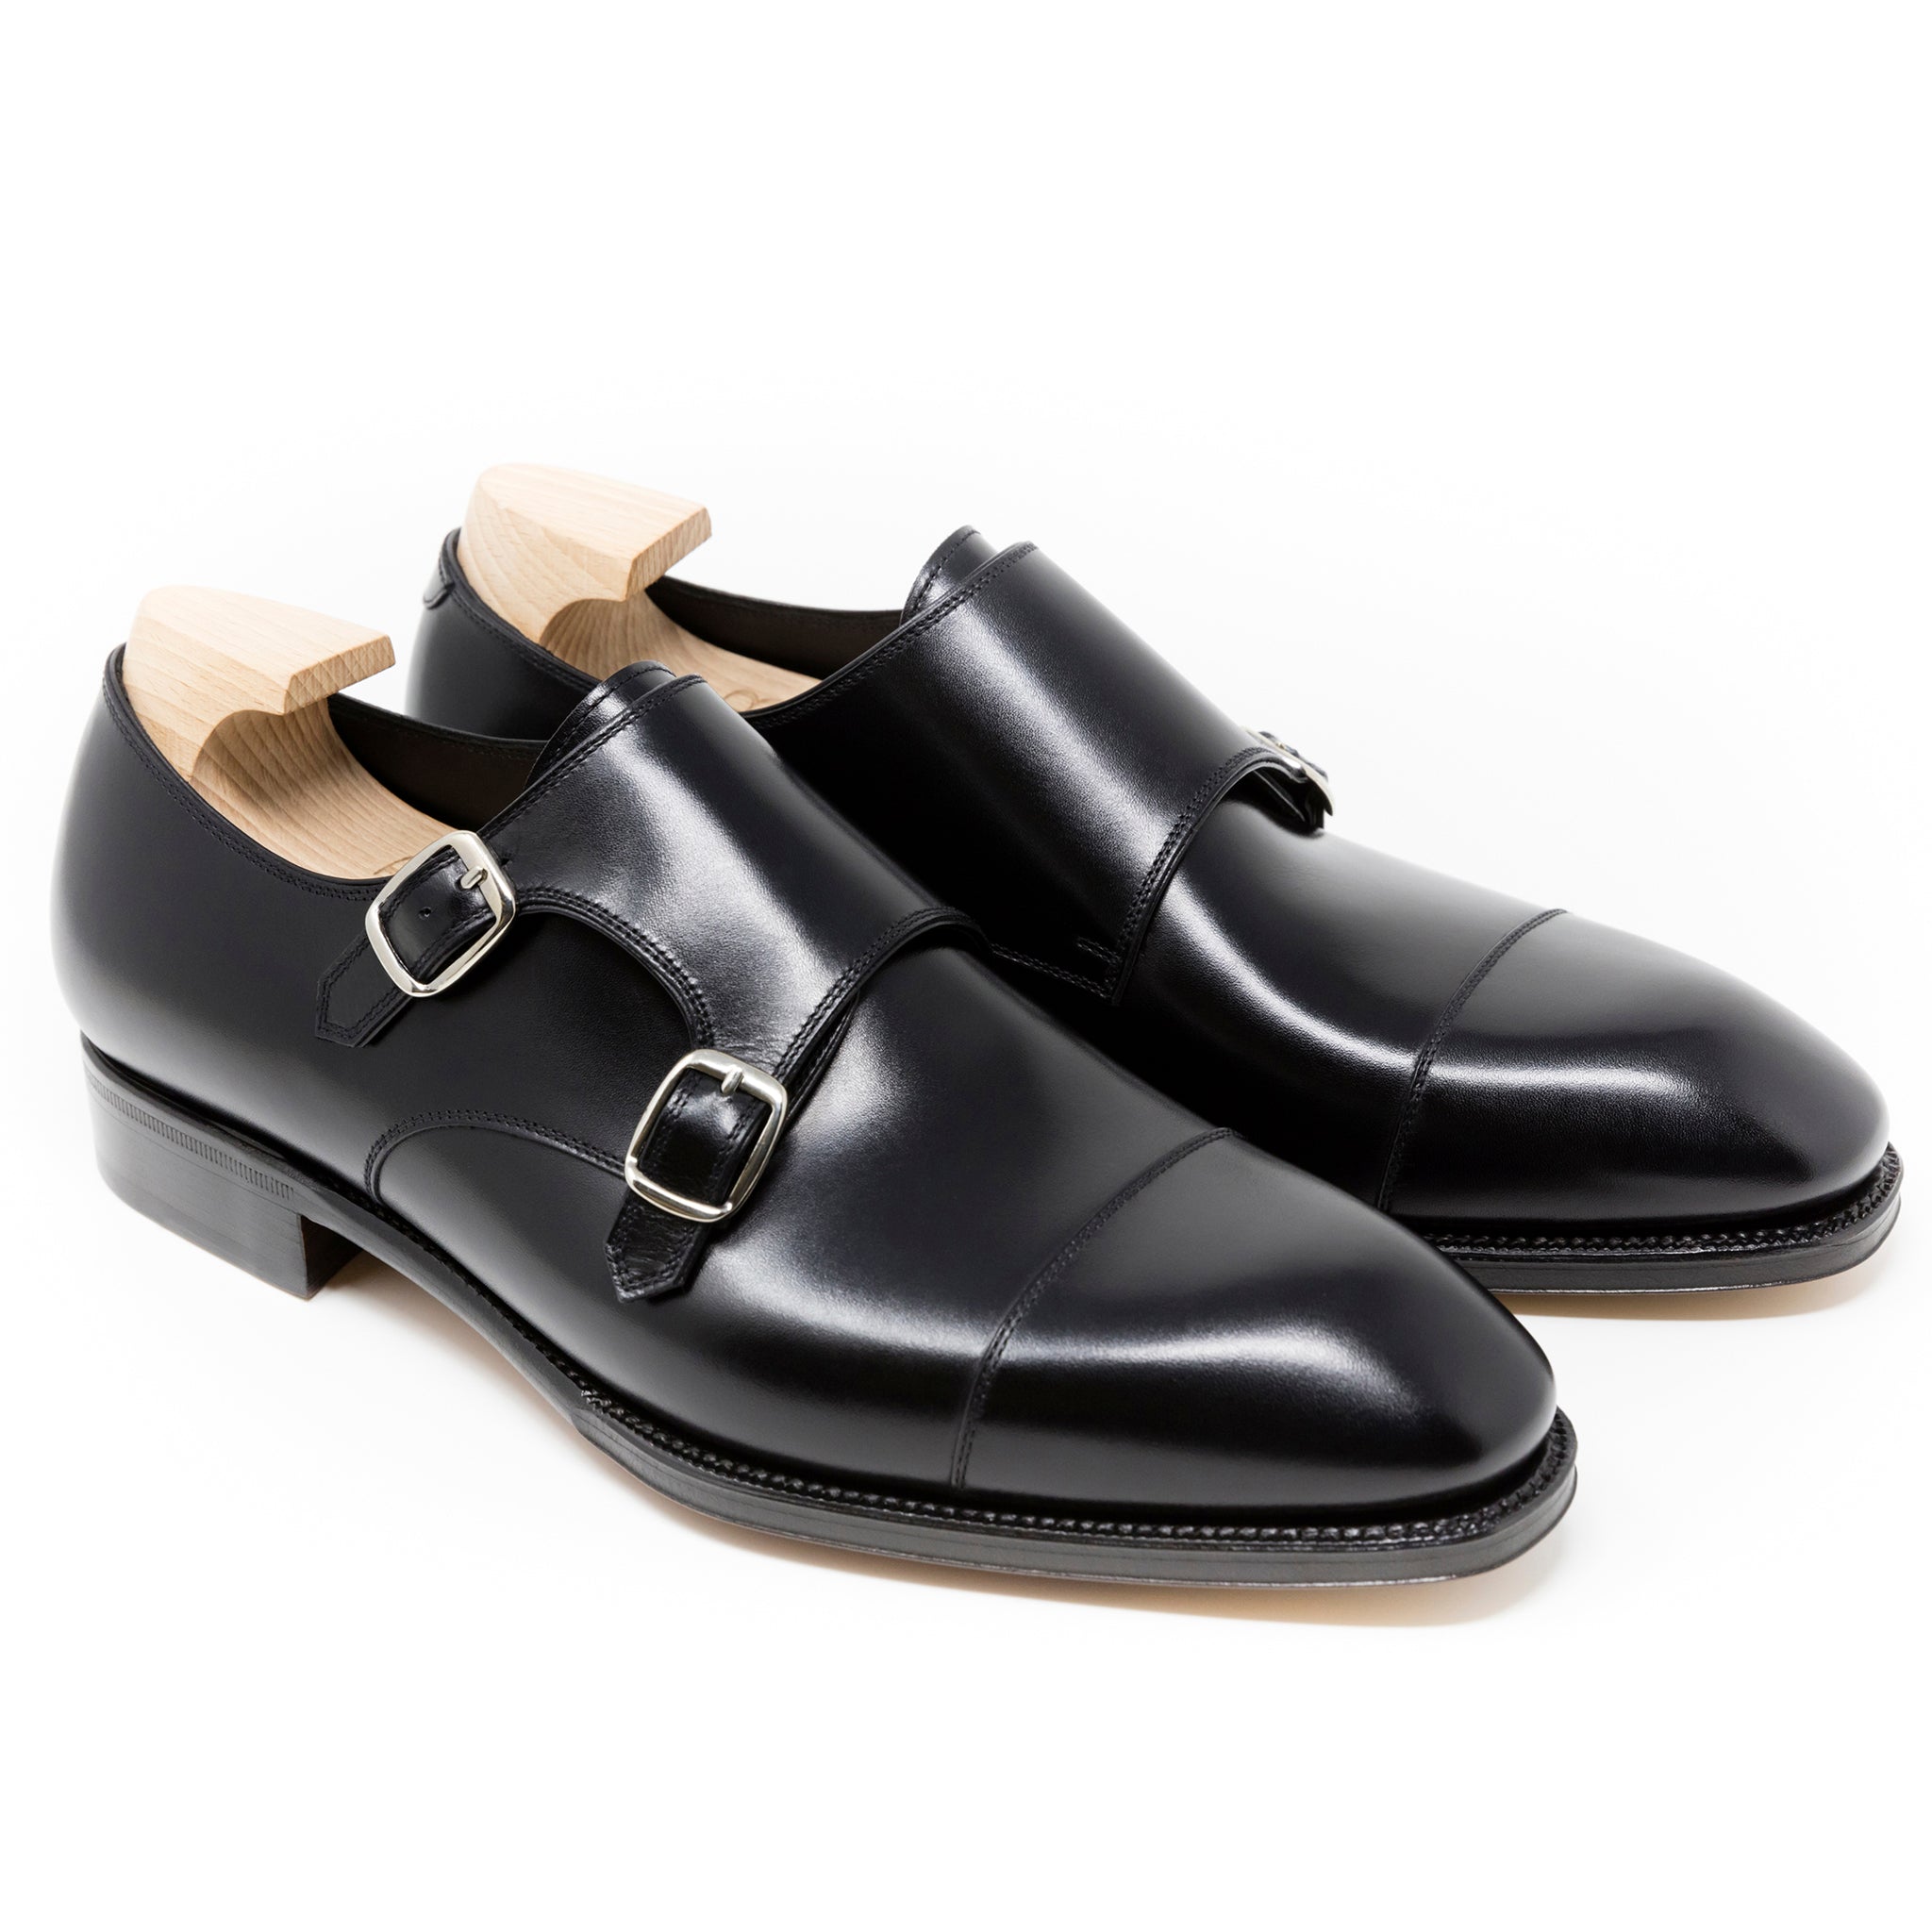 TLB Mallorca | Shoes with buckle for men | Leather Monk shoes | Alan ...